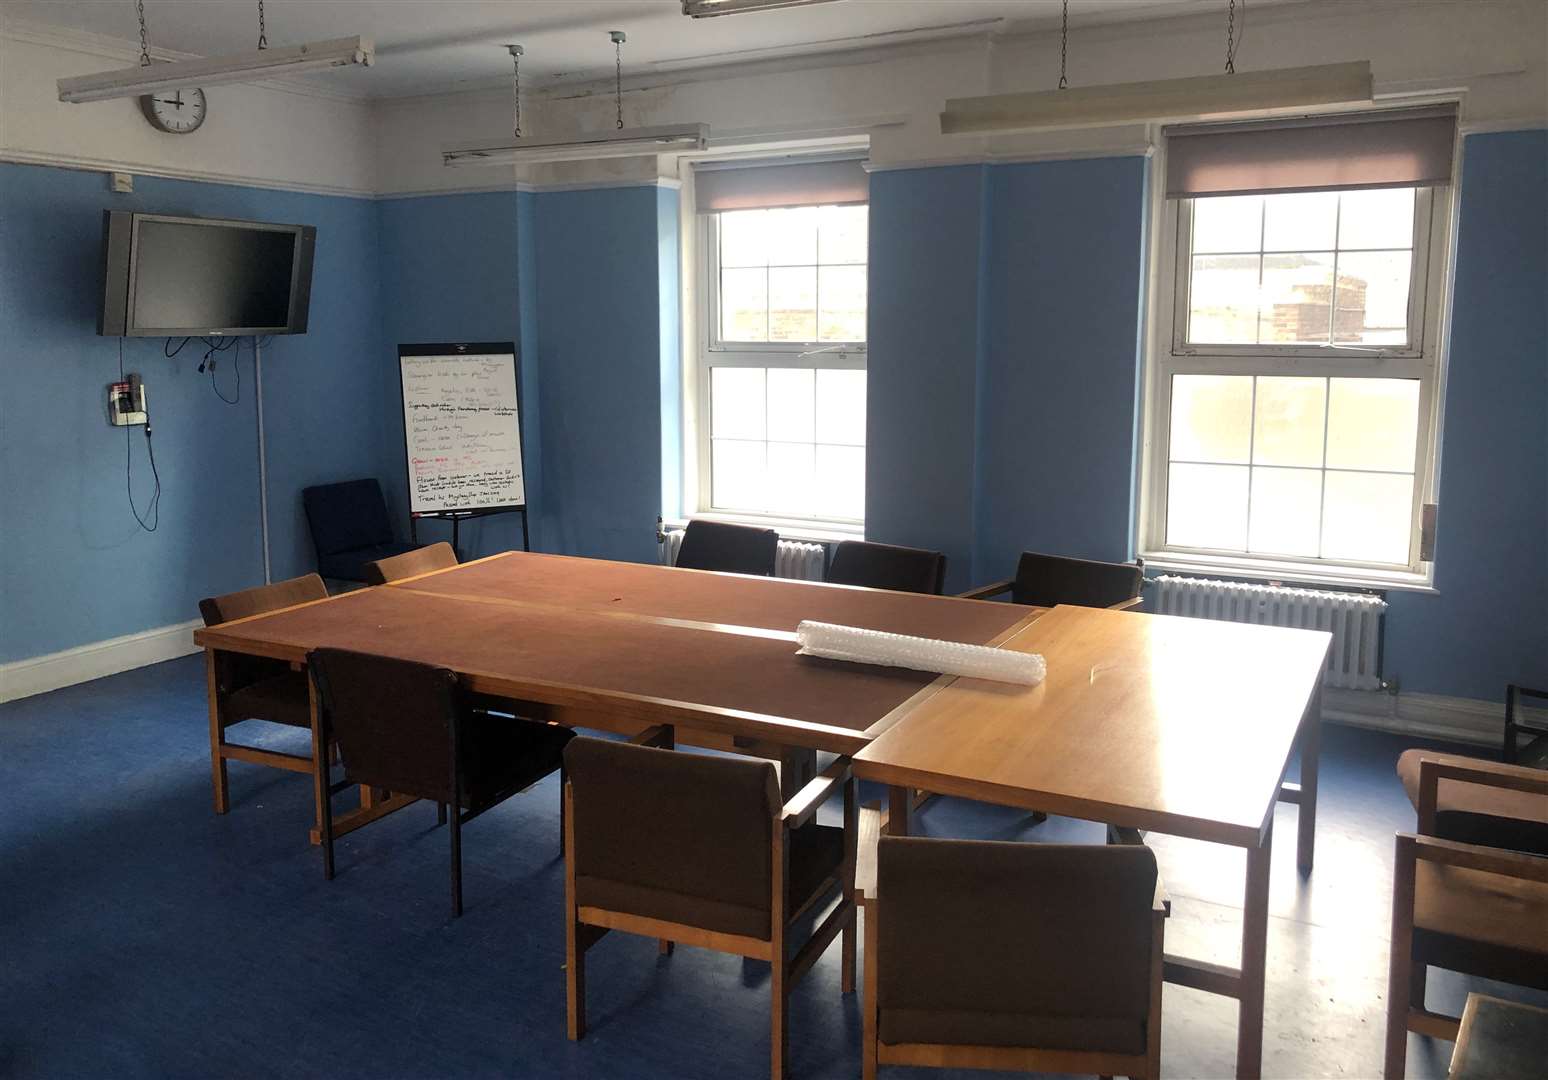 A meeting room over the front entrance pictured in 2019. Picture: Steve Salter